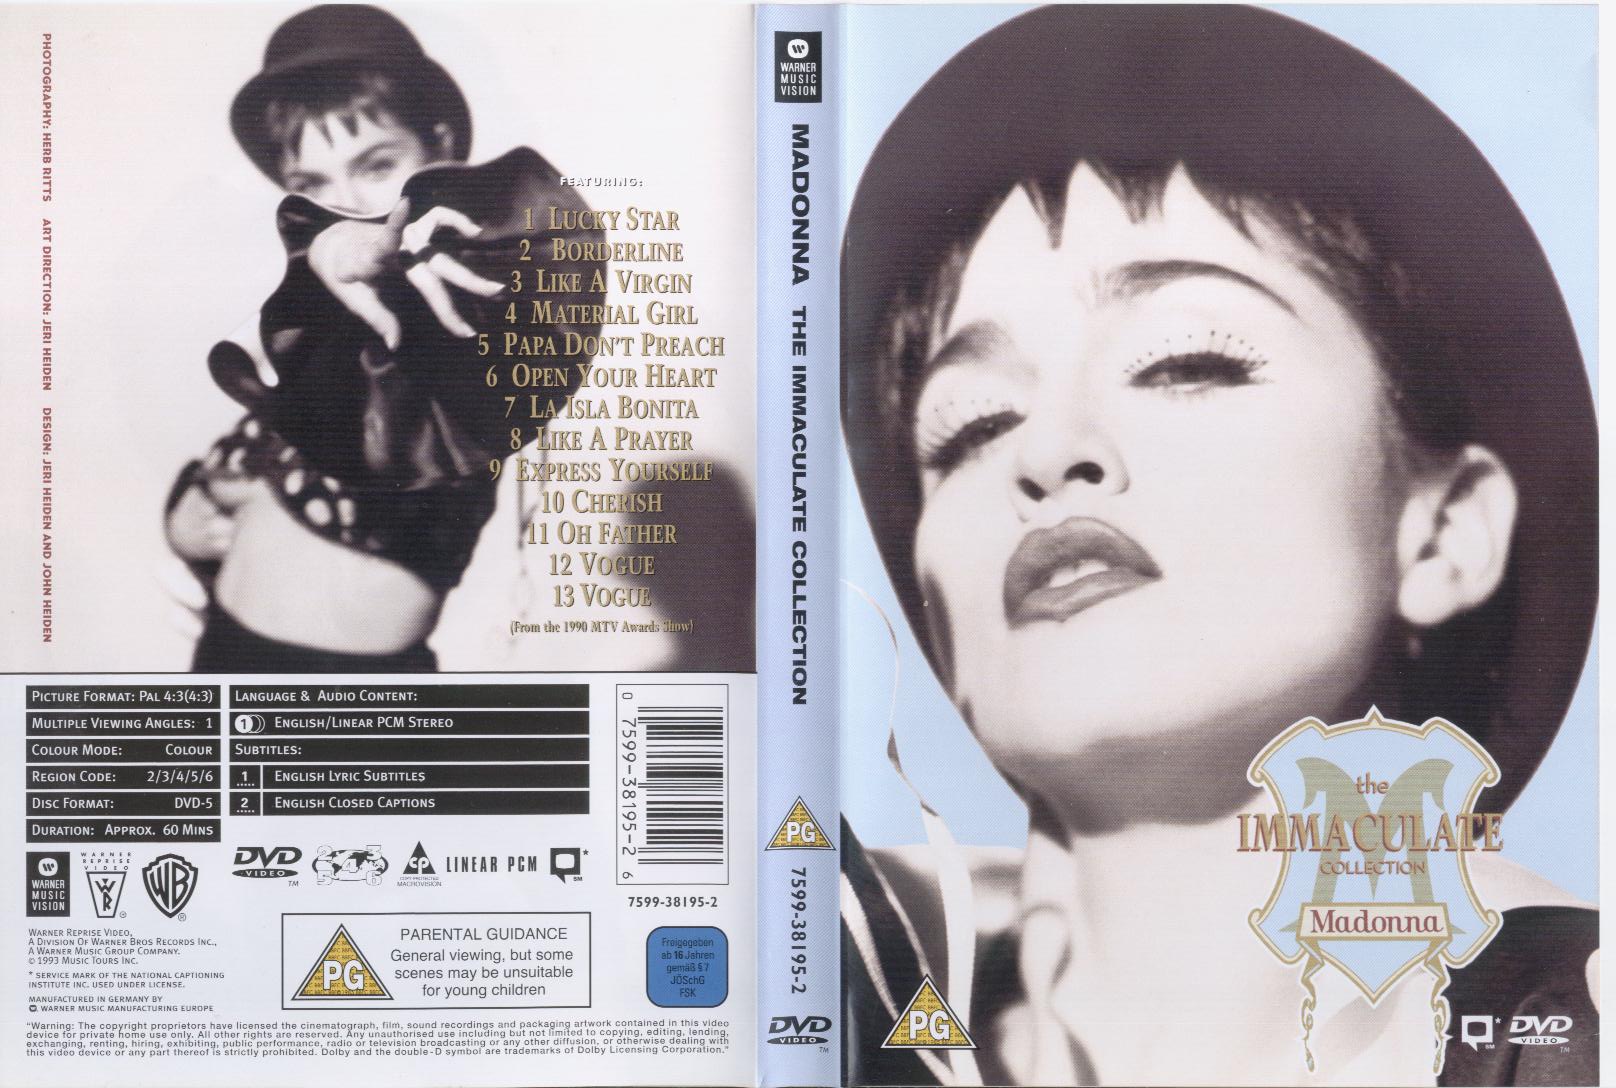 Jaquette DVD Madonna the immaculate collection v2